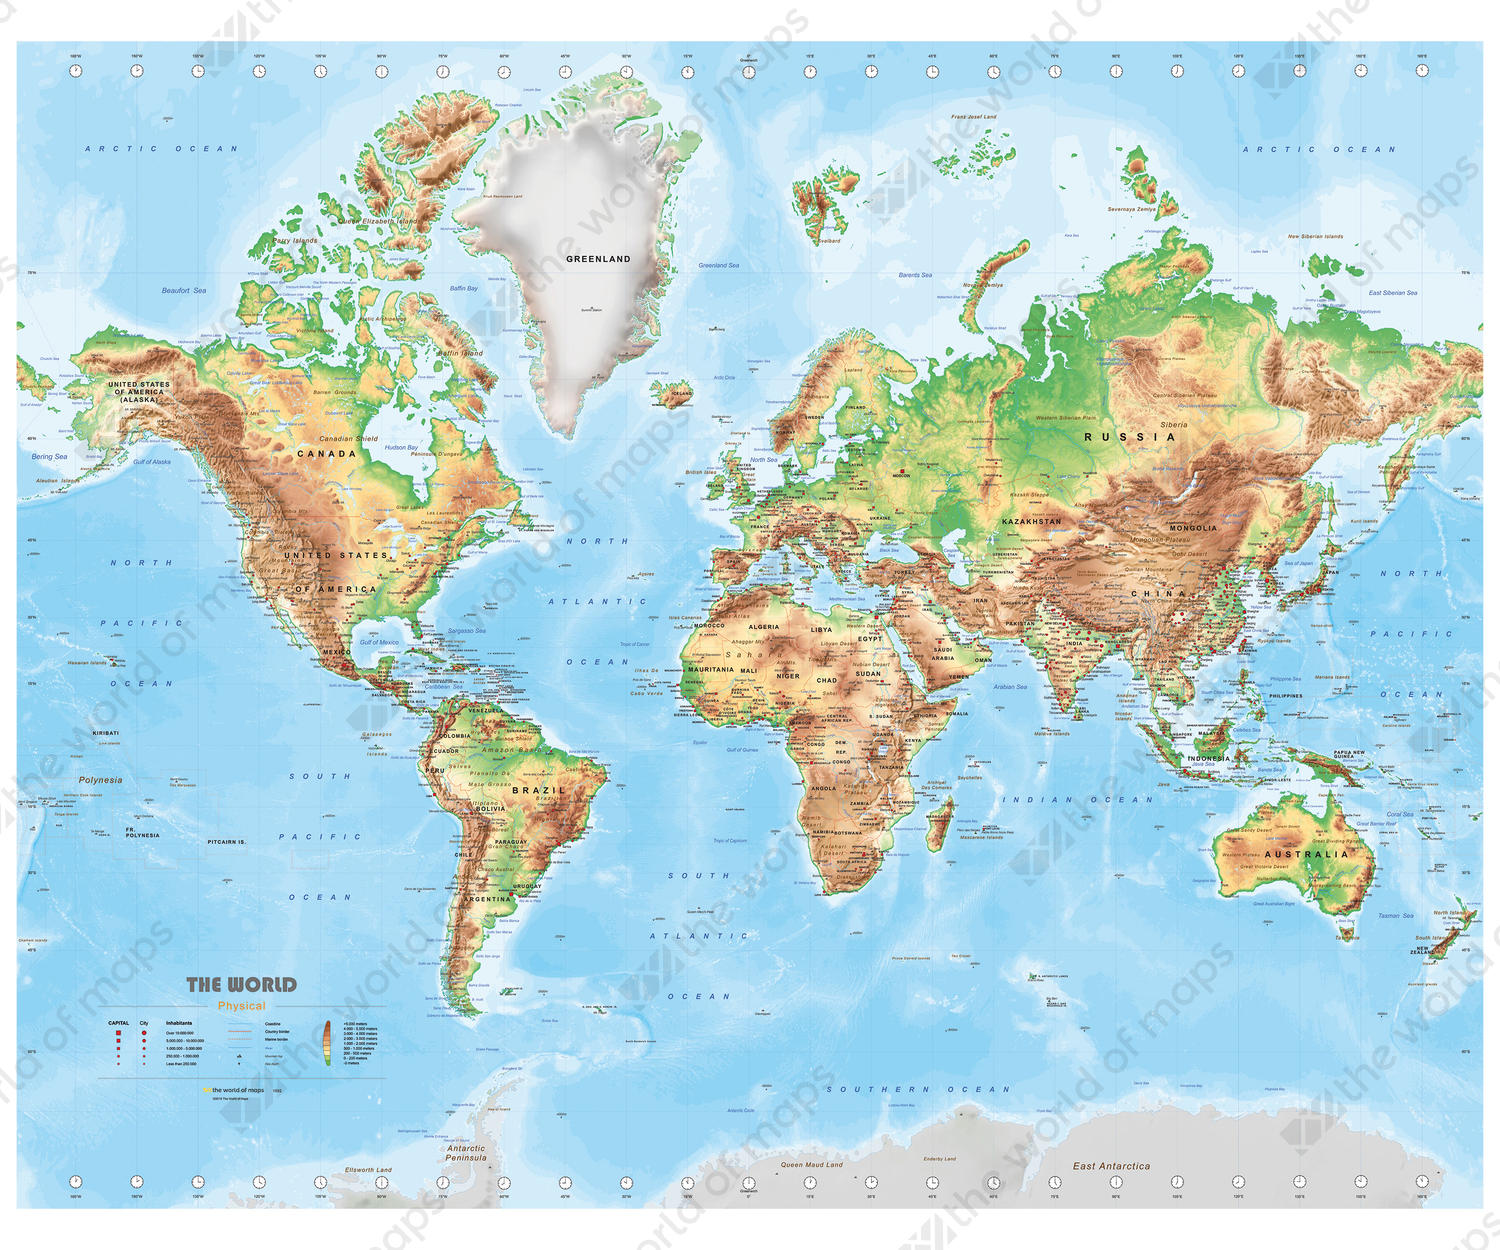 Digital Physical Map Of The World Medium 1502 The World Of Maps Com